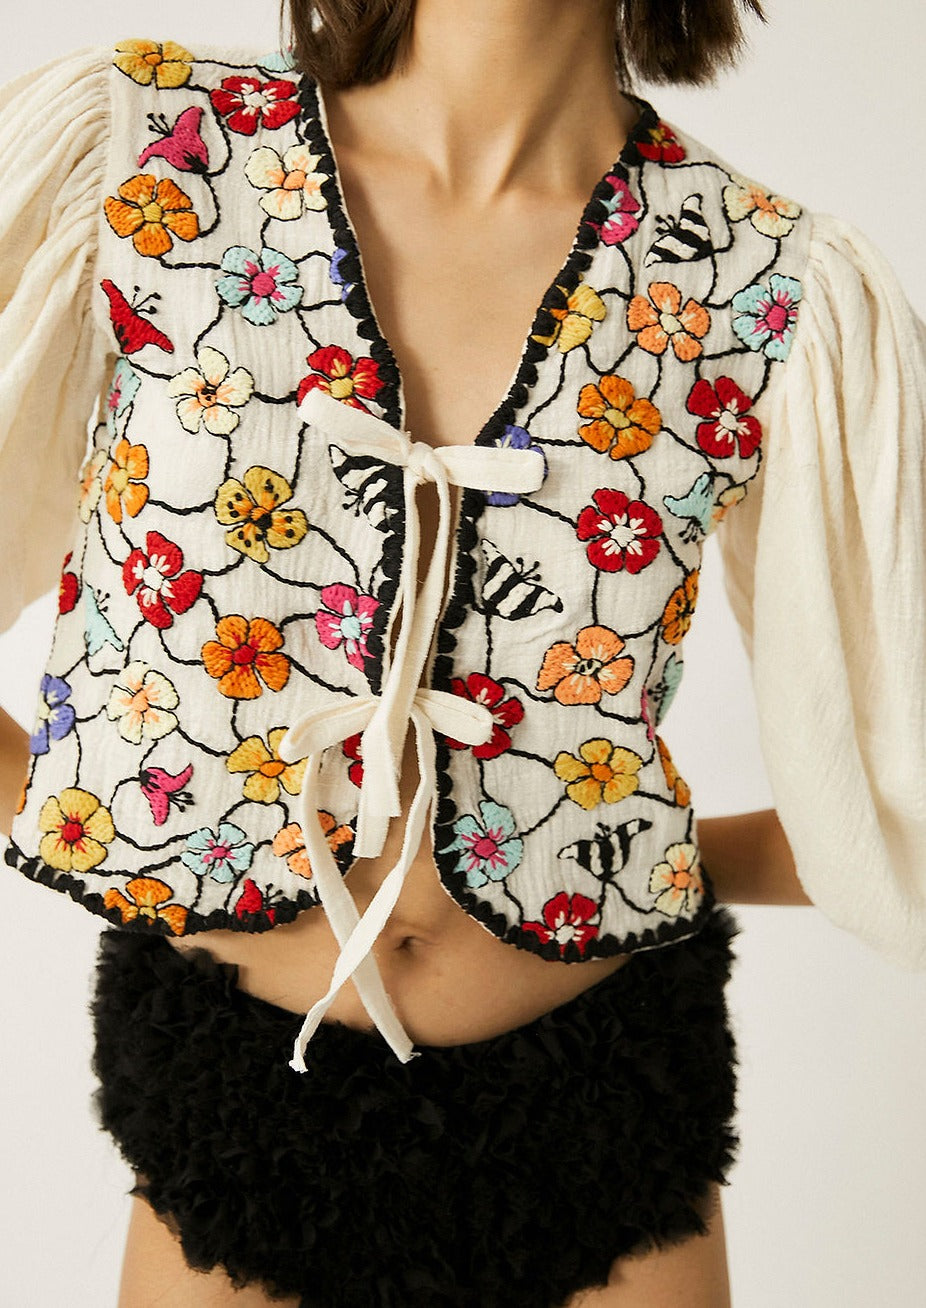 Diamantina Hand-Embroidered Blouse